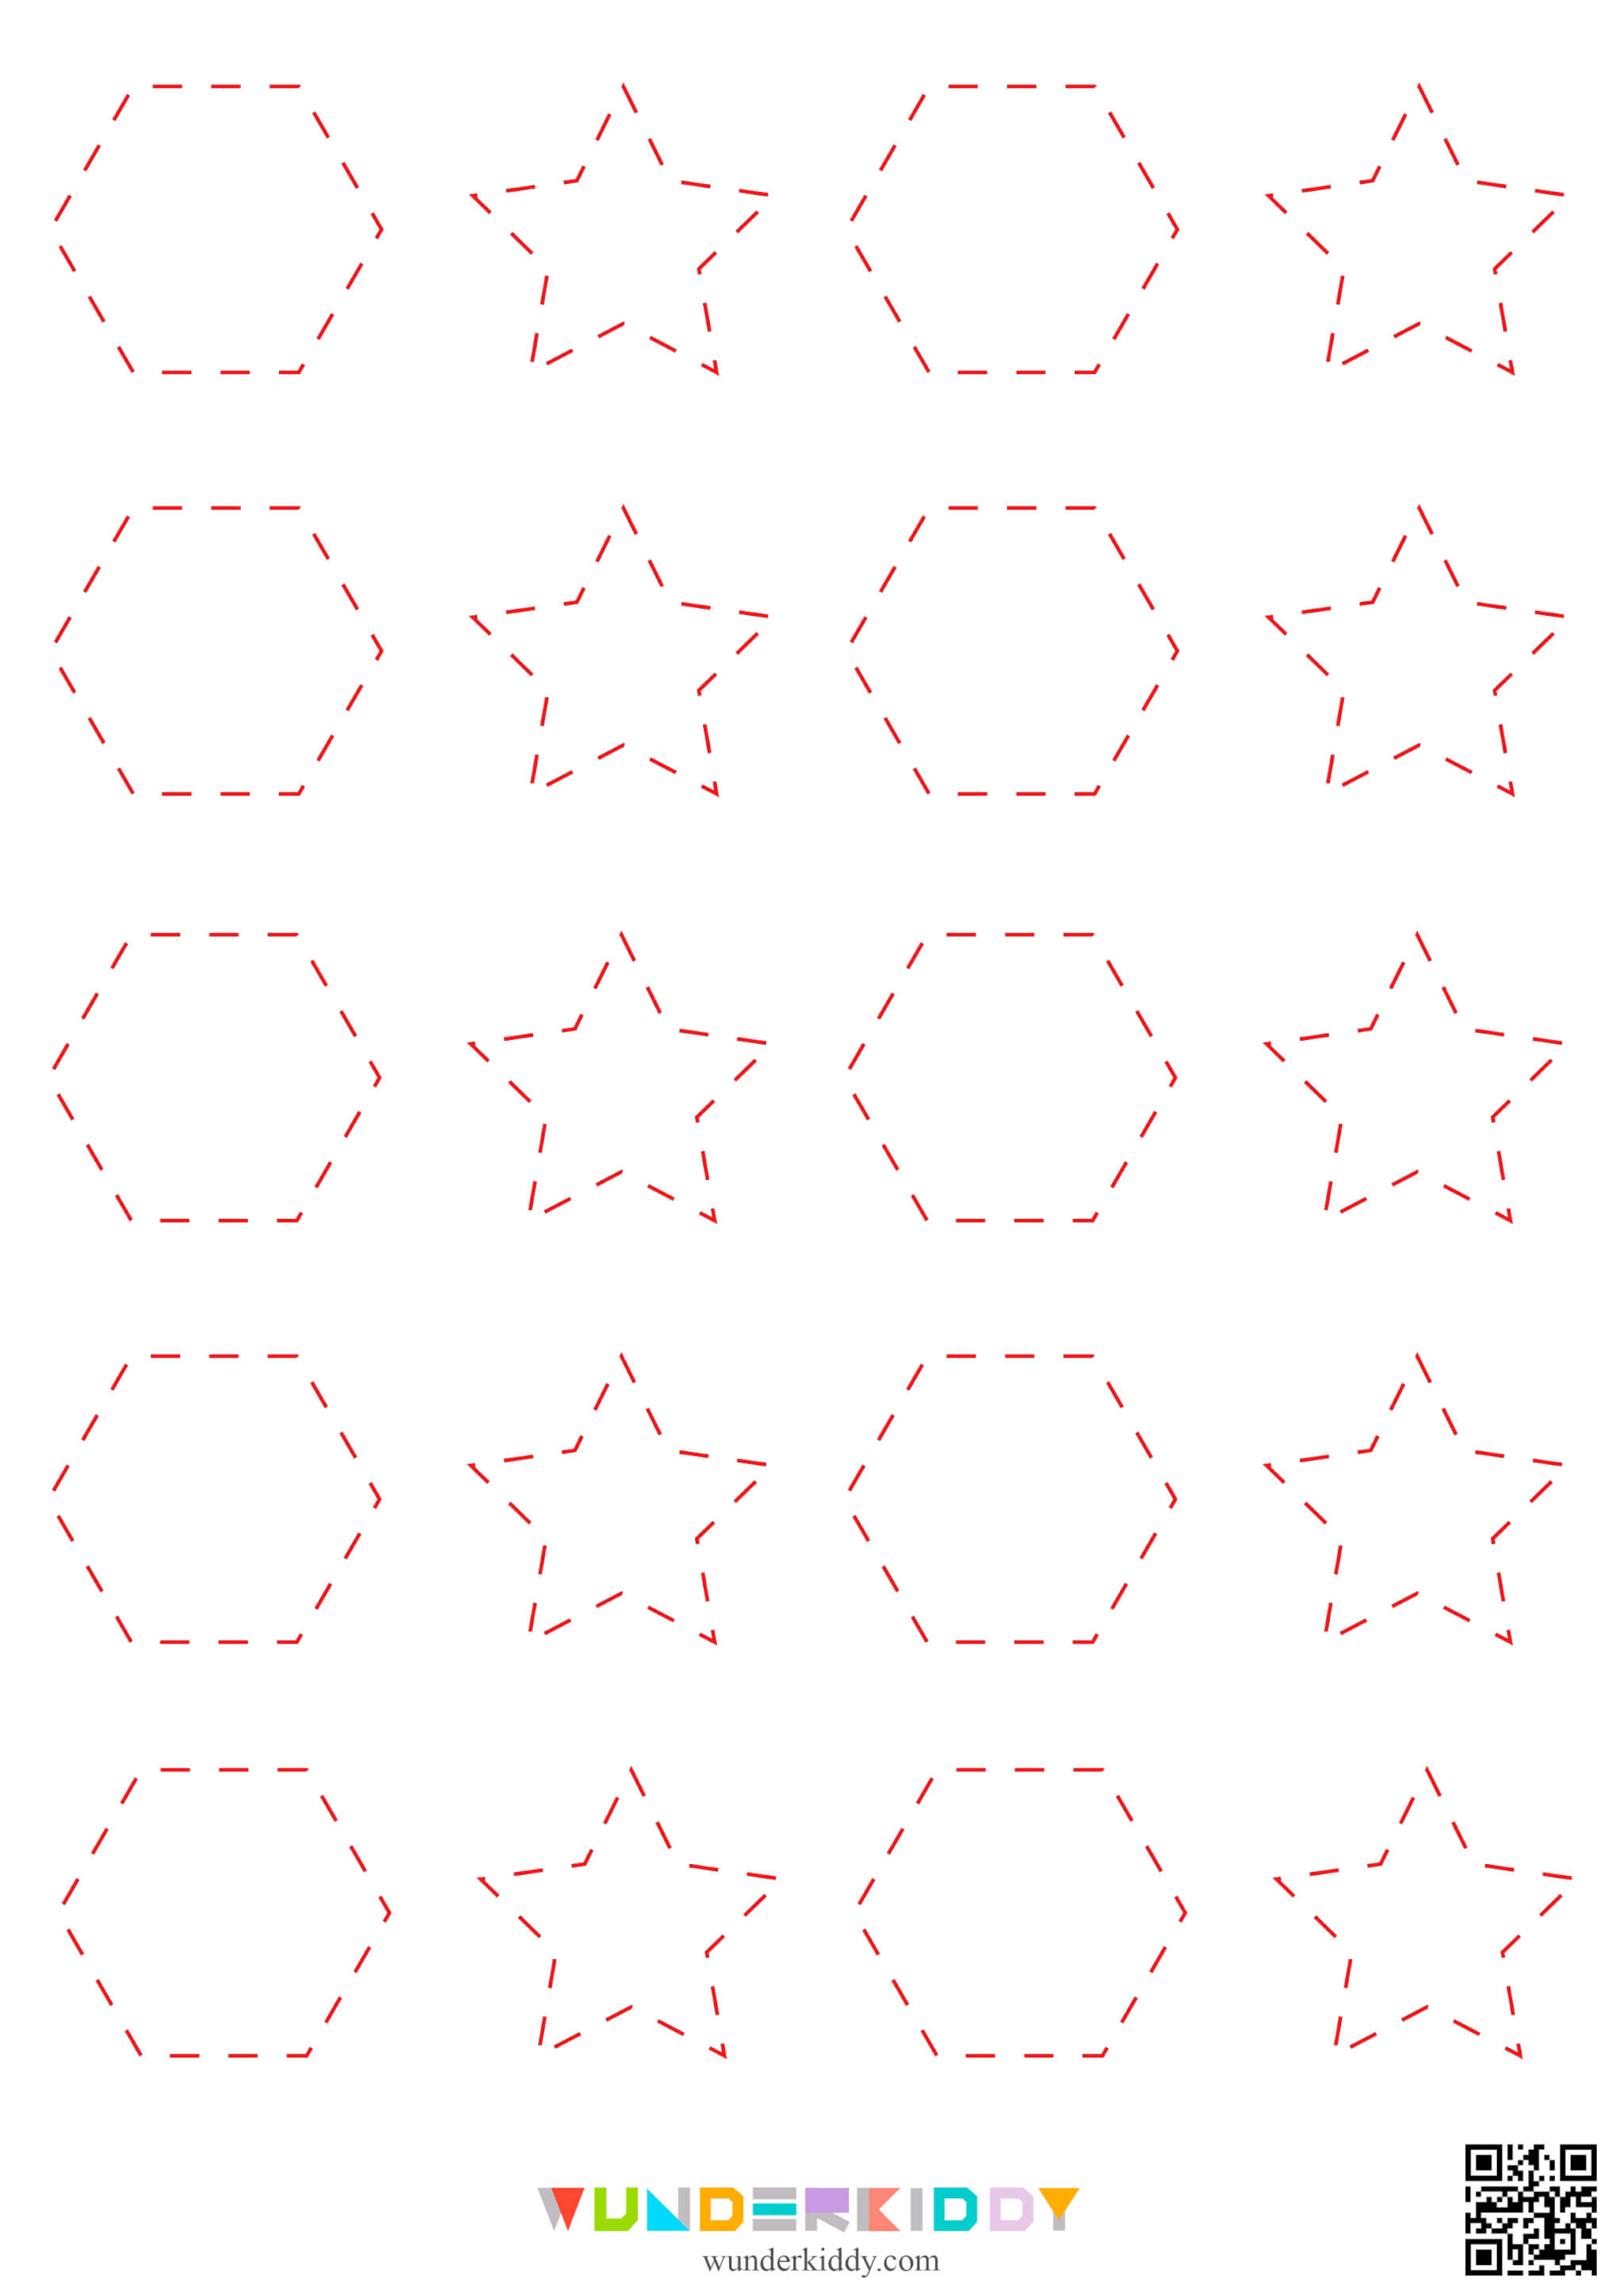 Paper Cutting Templates Lines and Shapes - Image 9